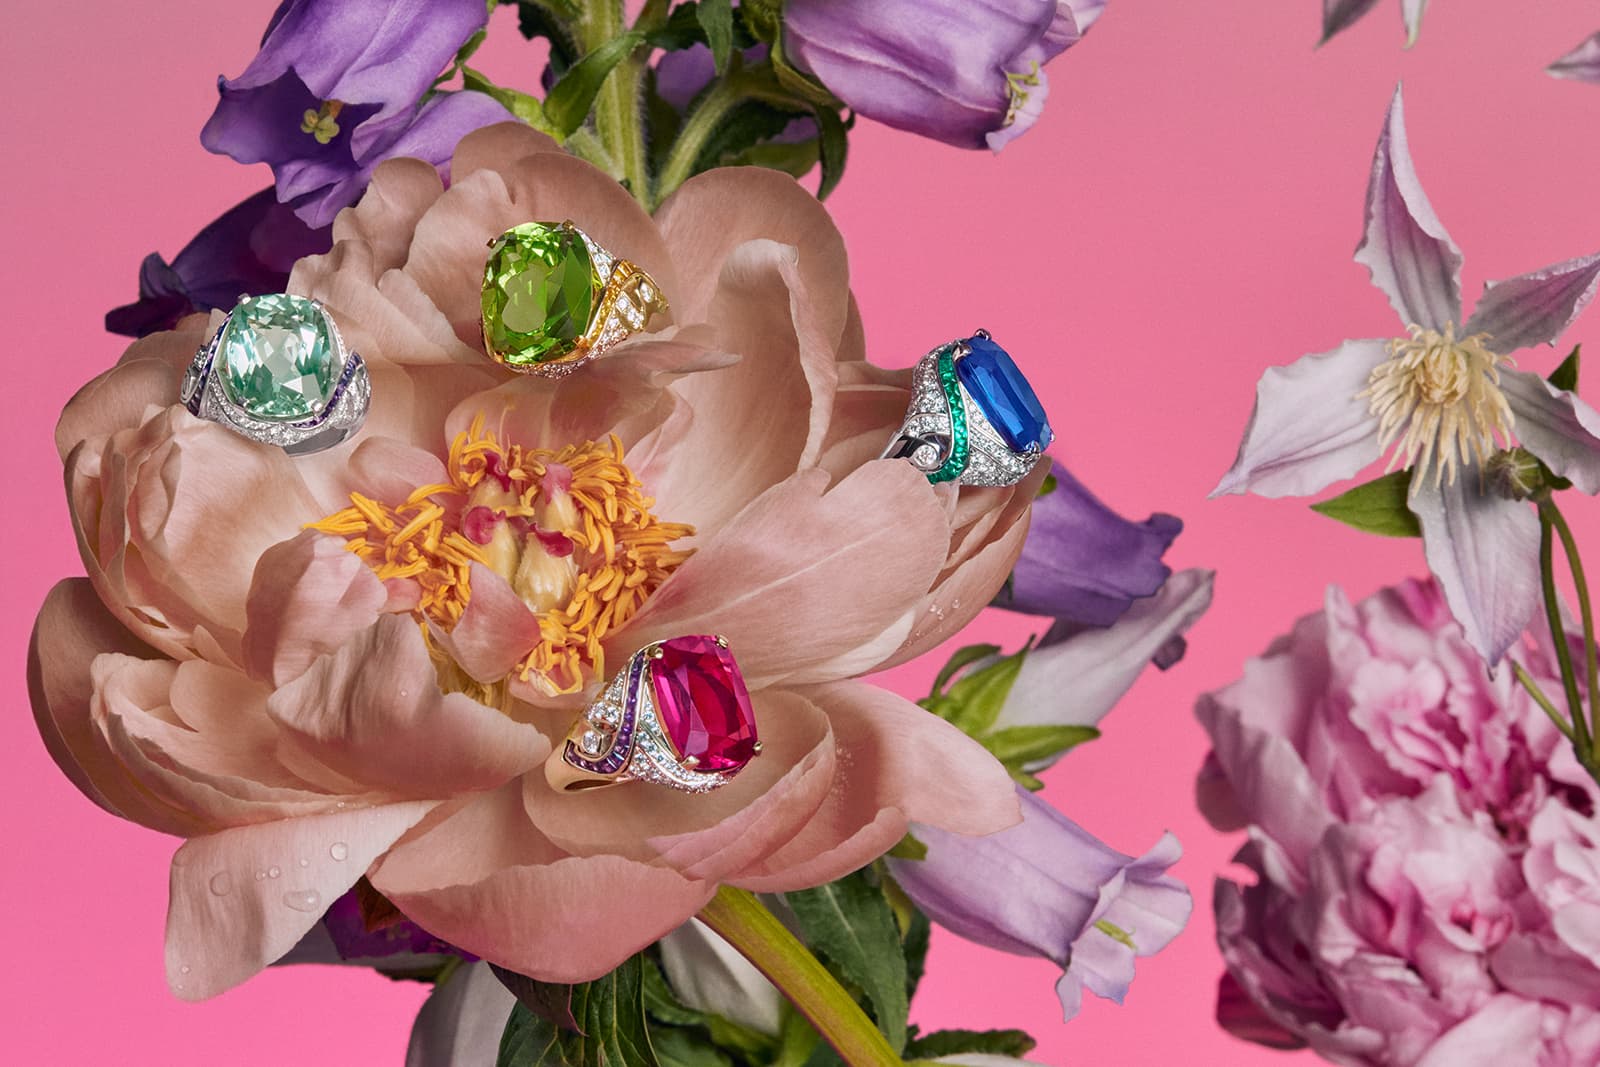 Bulgari coloured gemstone cocktail rings from the Eden The Garden of Wonders High Jewellery collection